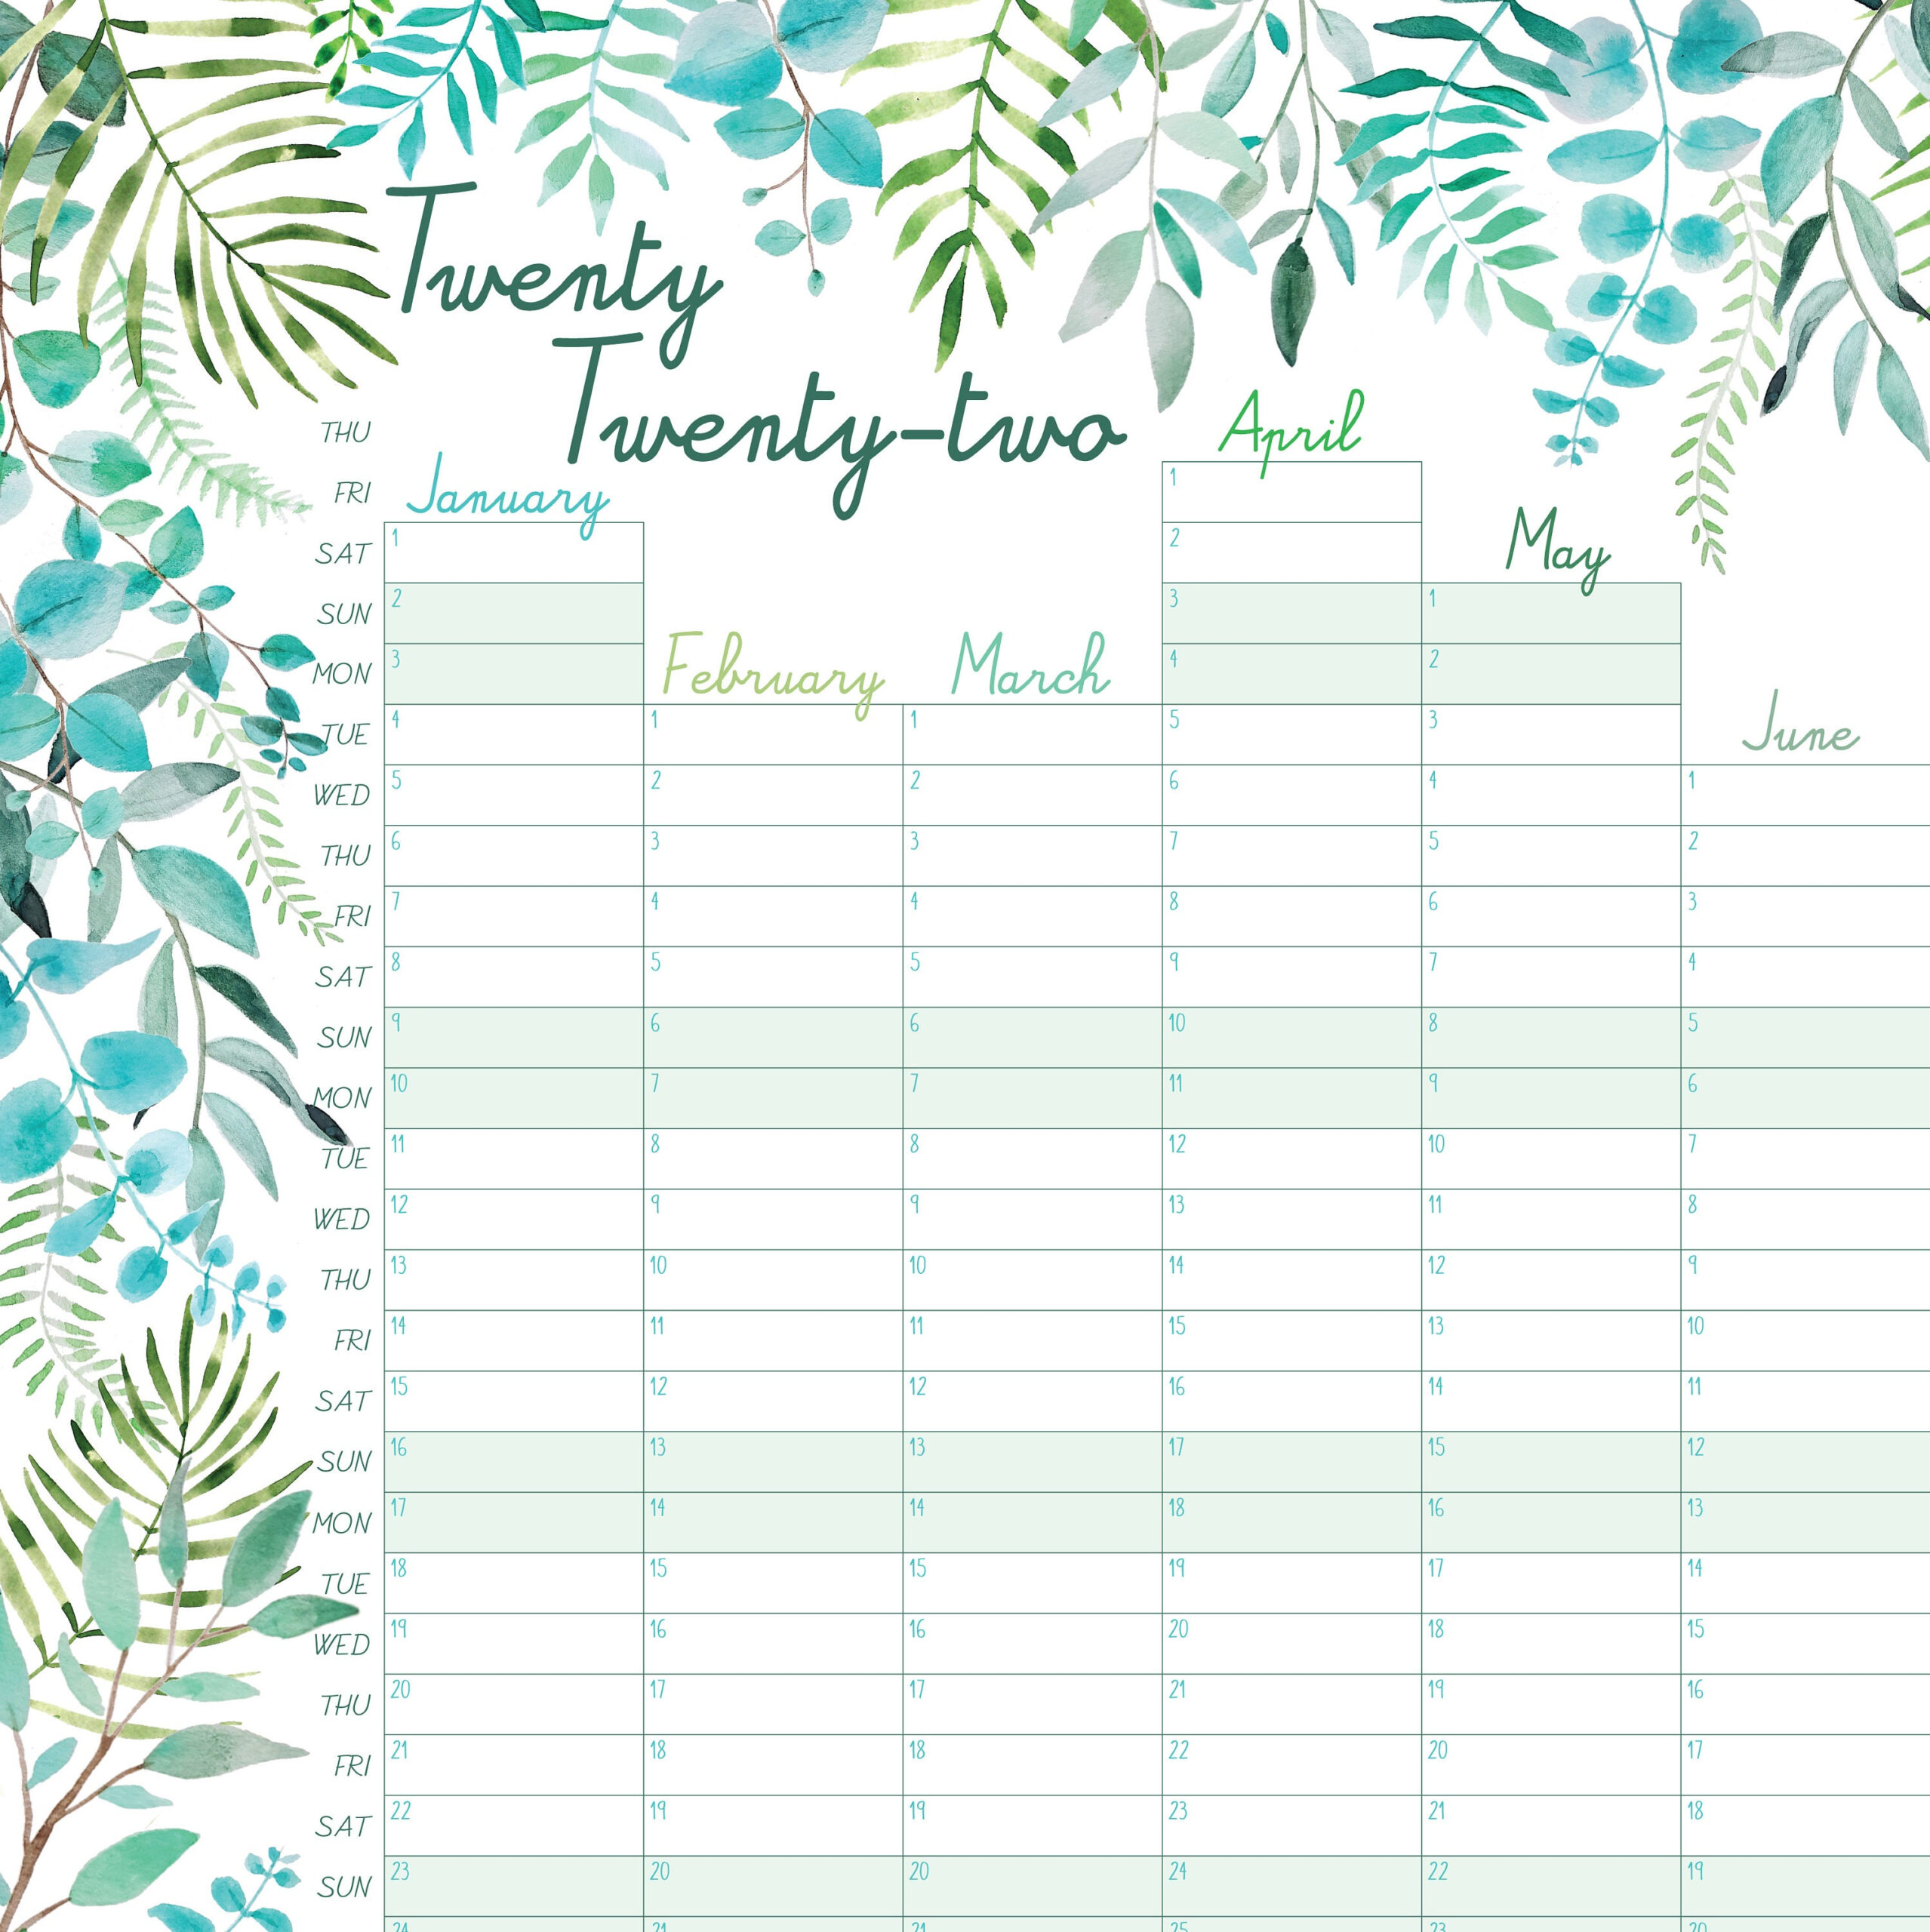 2022 Lush Botanical Wall Calendar Yearly Planner 2022 | Etsy within Calender 2022 Wall Calendar